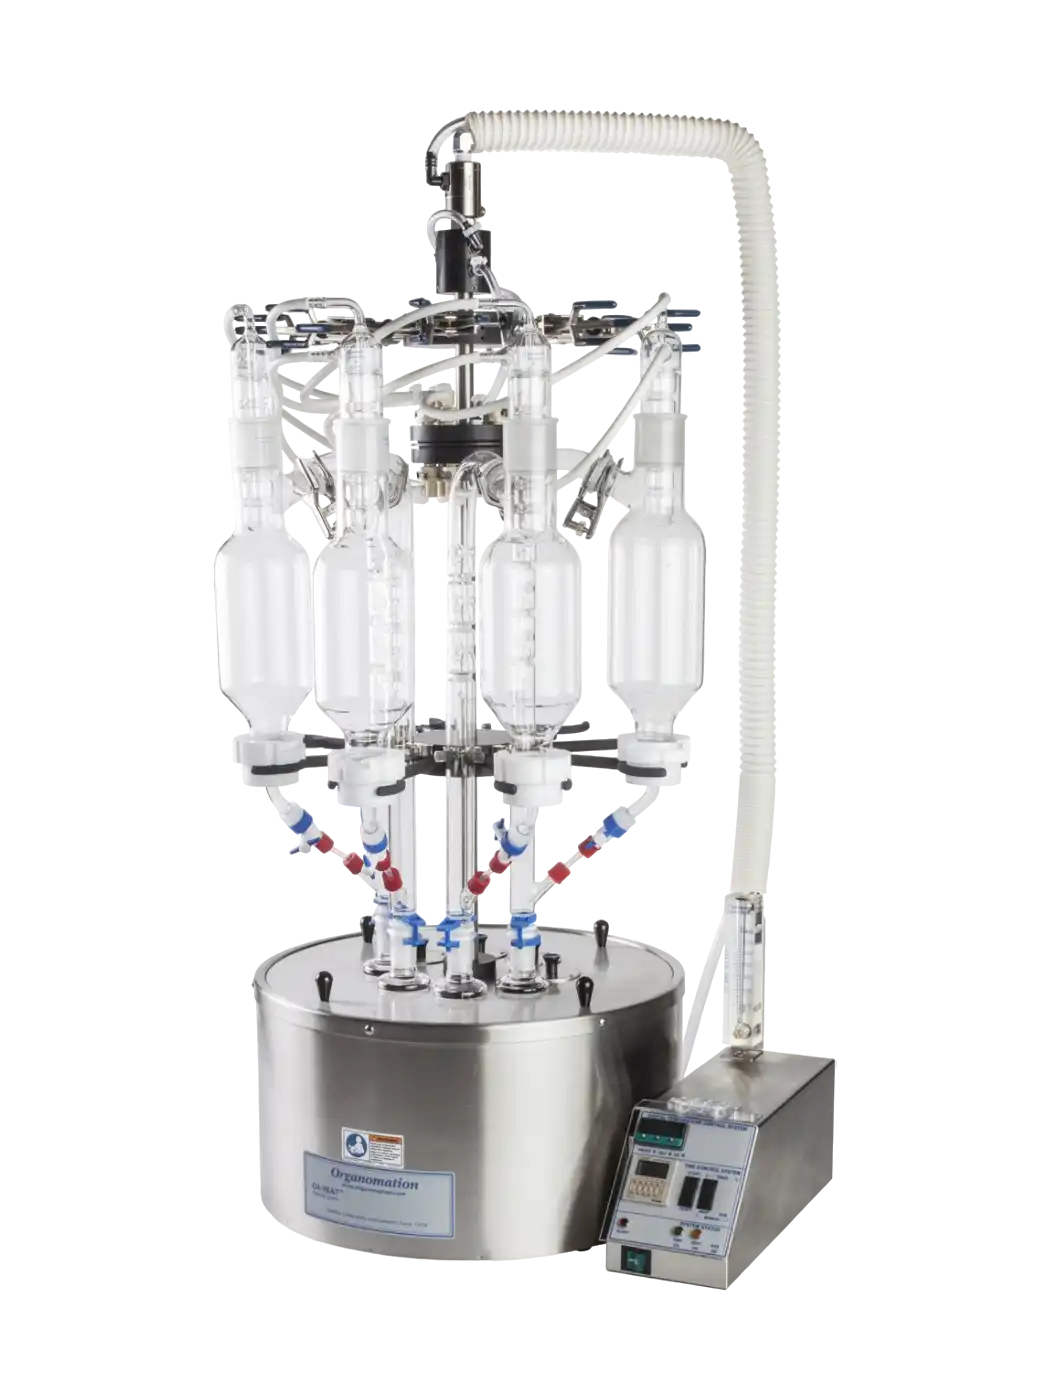 Solvent Extraction (Liquid-Liquid Corning Accelerated One-Step) Unit, ROT-X-TRACT-LC Series, with Water Bath (30-100°C and 1600 W), Digital Control, 8 Sample Positions